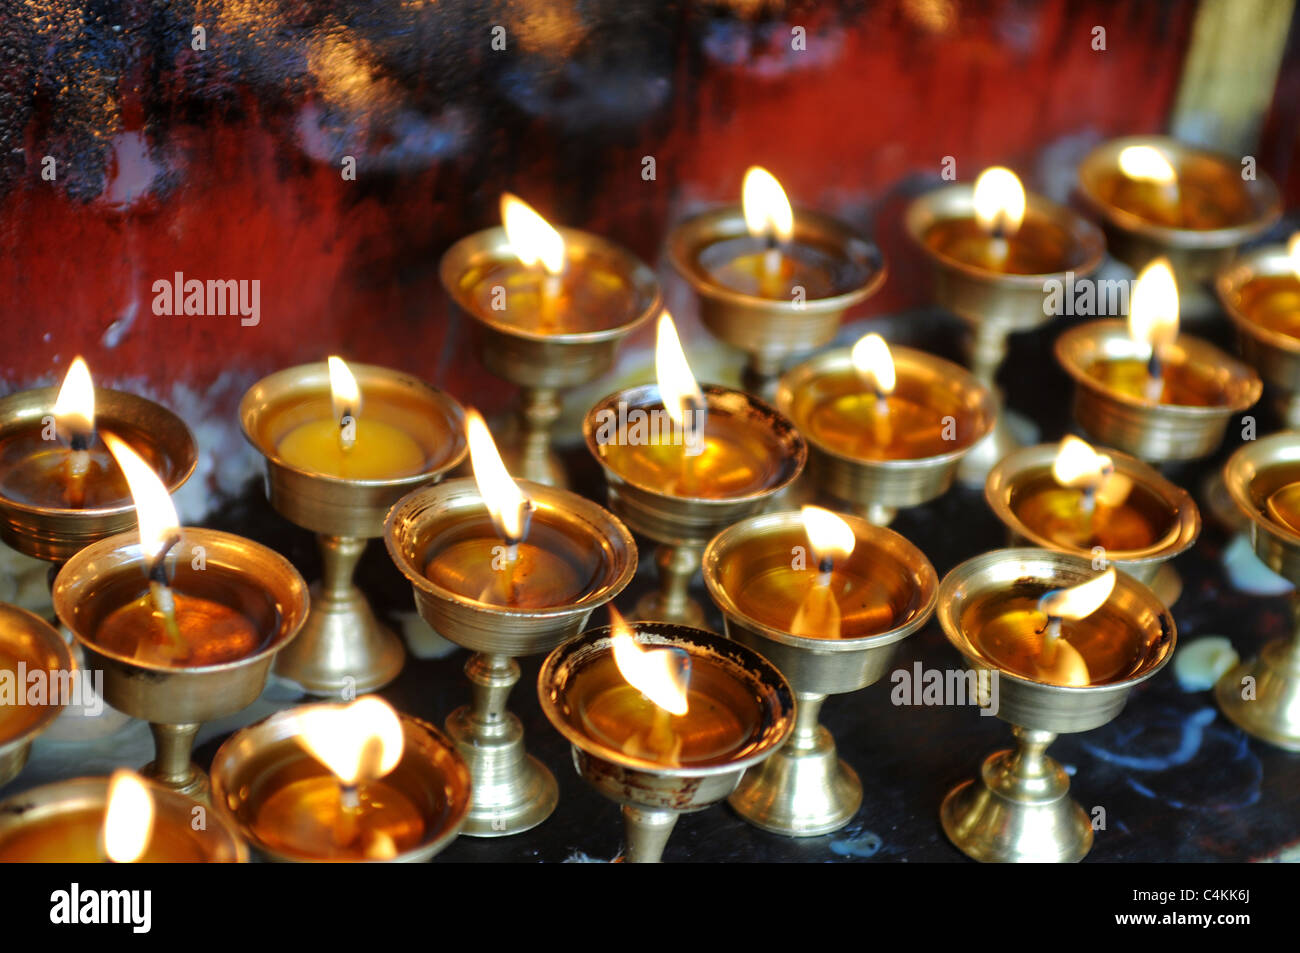 Burning yak butter lamps in a monastery, Lhasa,Tibet Stock Photo